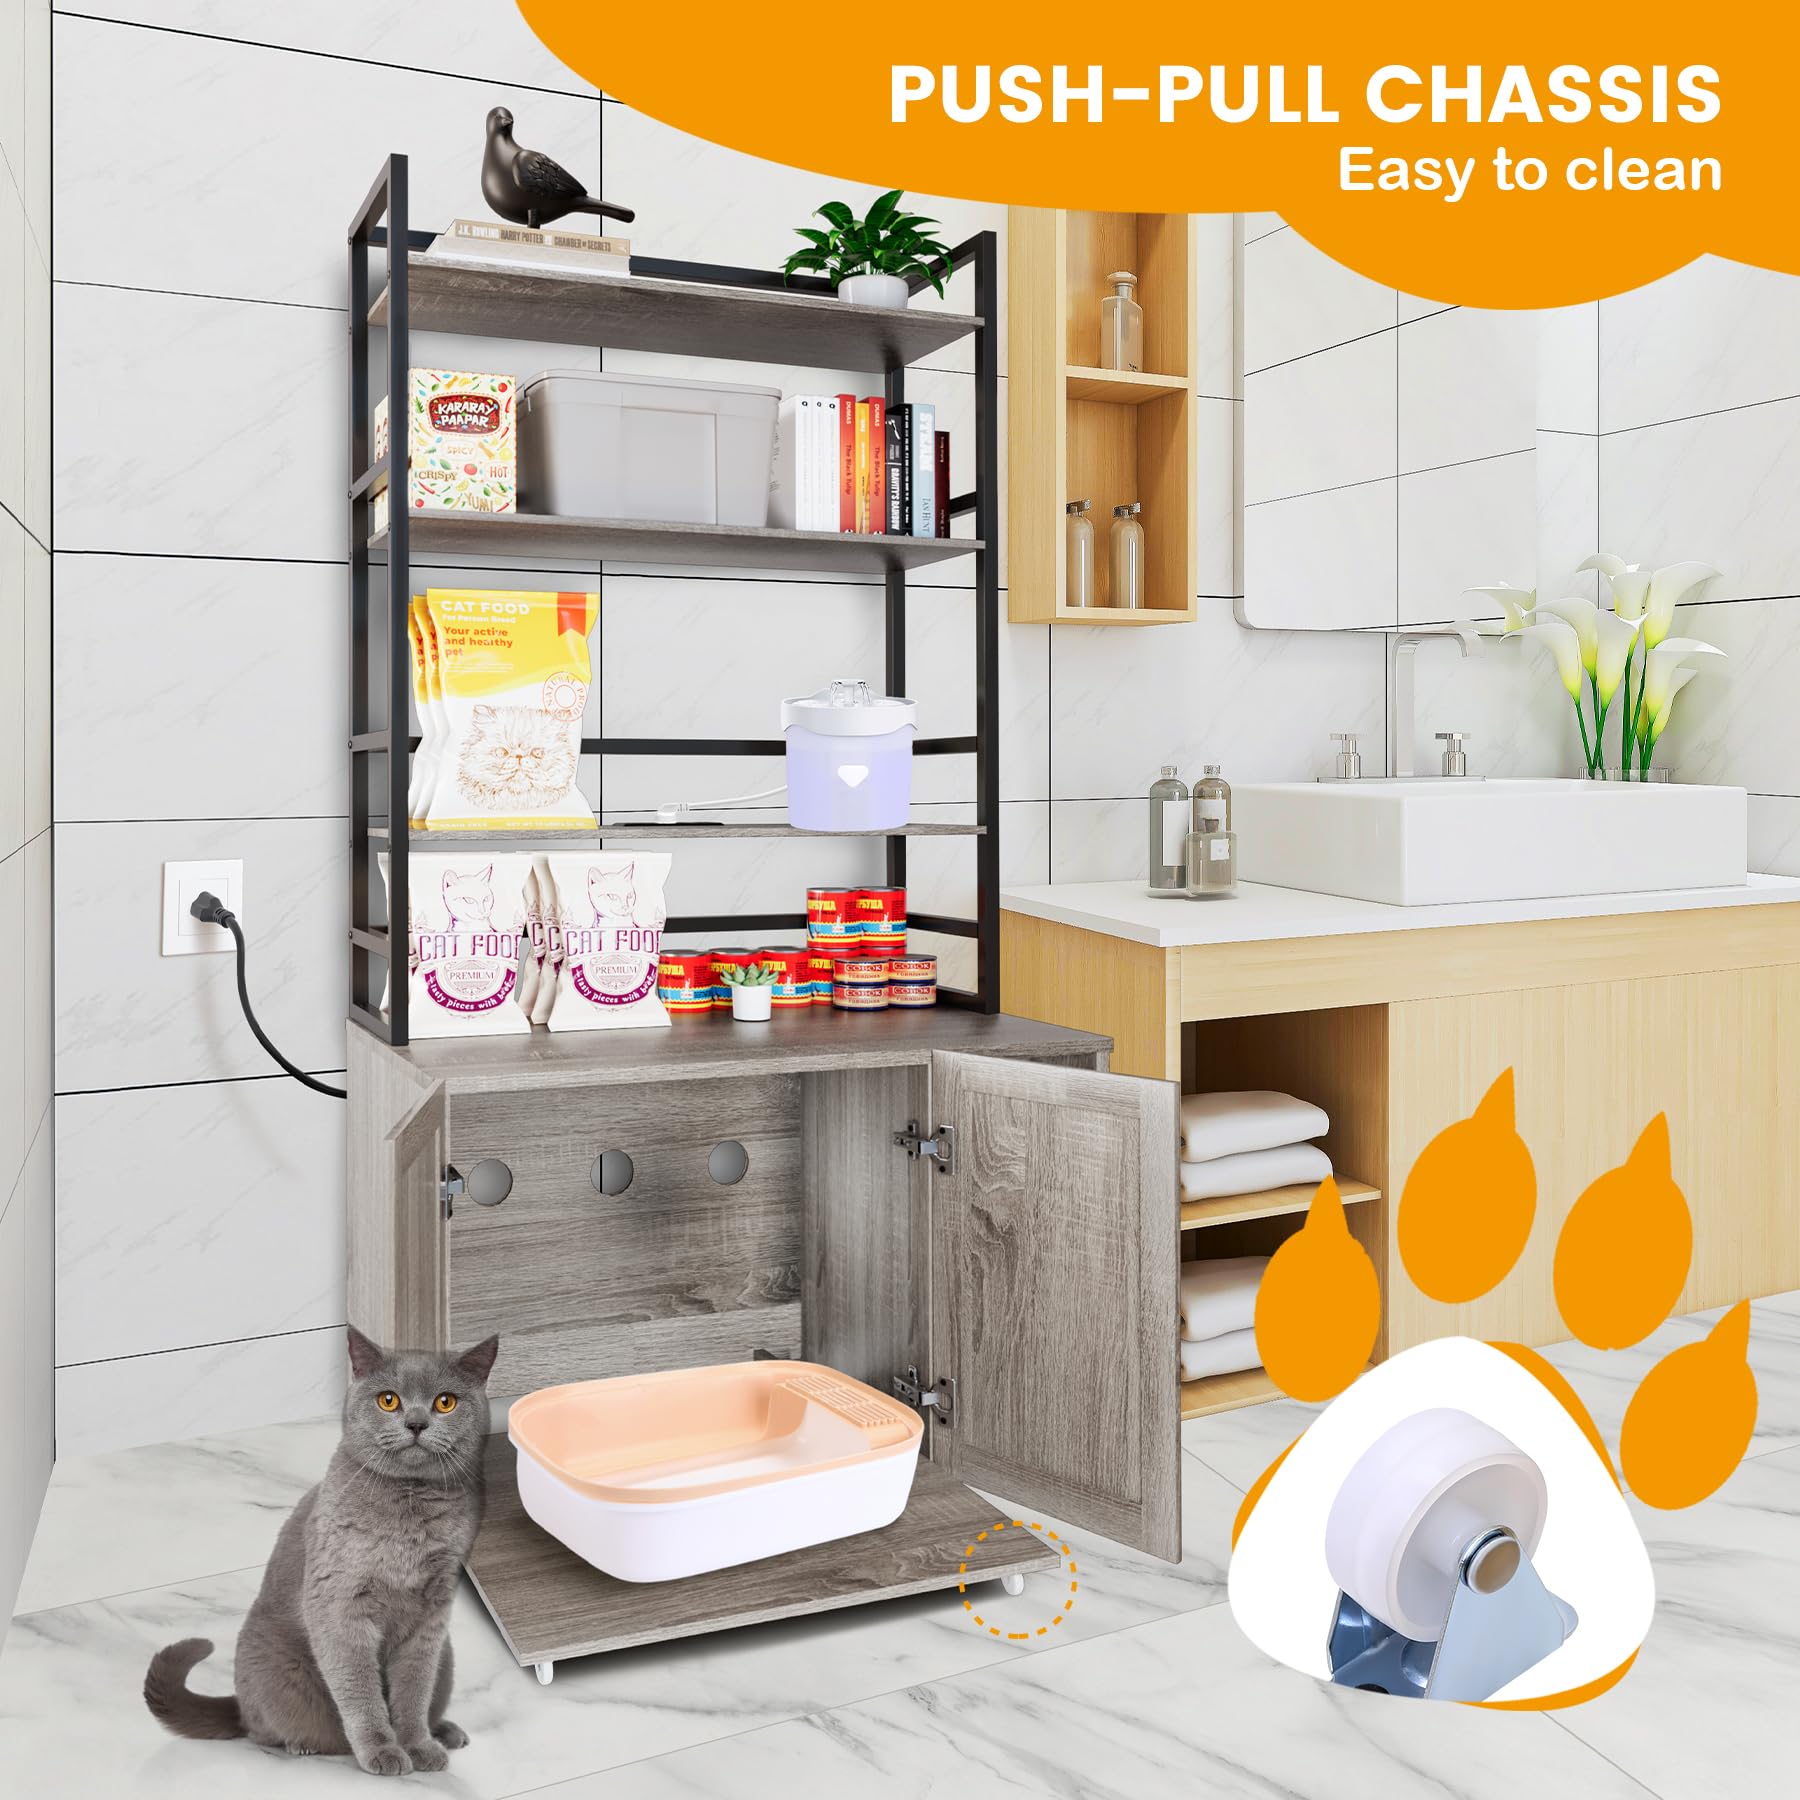 Cat Litter Box Enclosure, Hidden Cat Litter Box Furniture, Large Double Door Cat House with 3 Shelves and Charging Station, Push-Pull Mobile Chassis